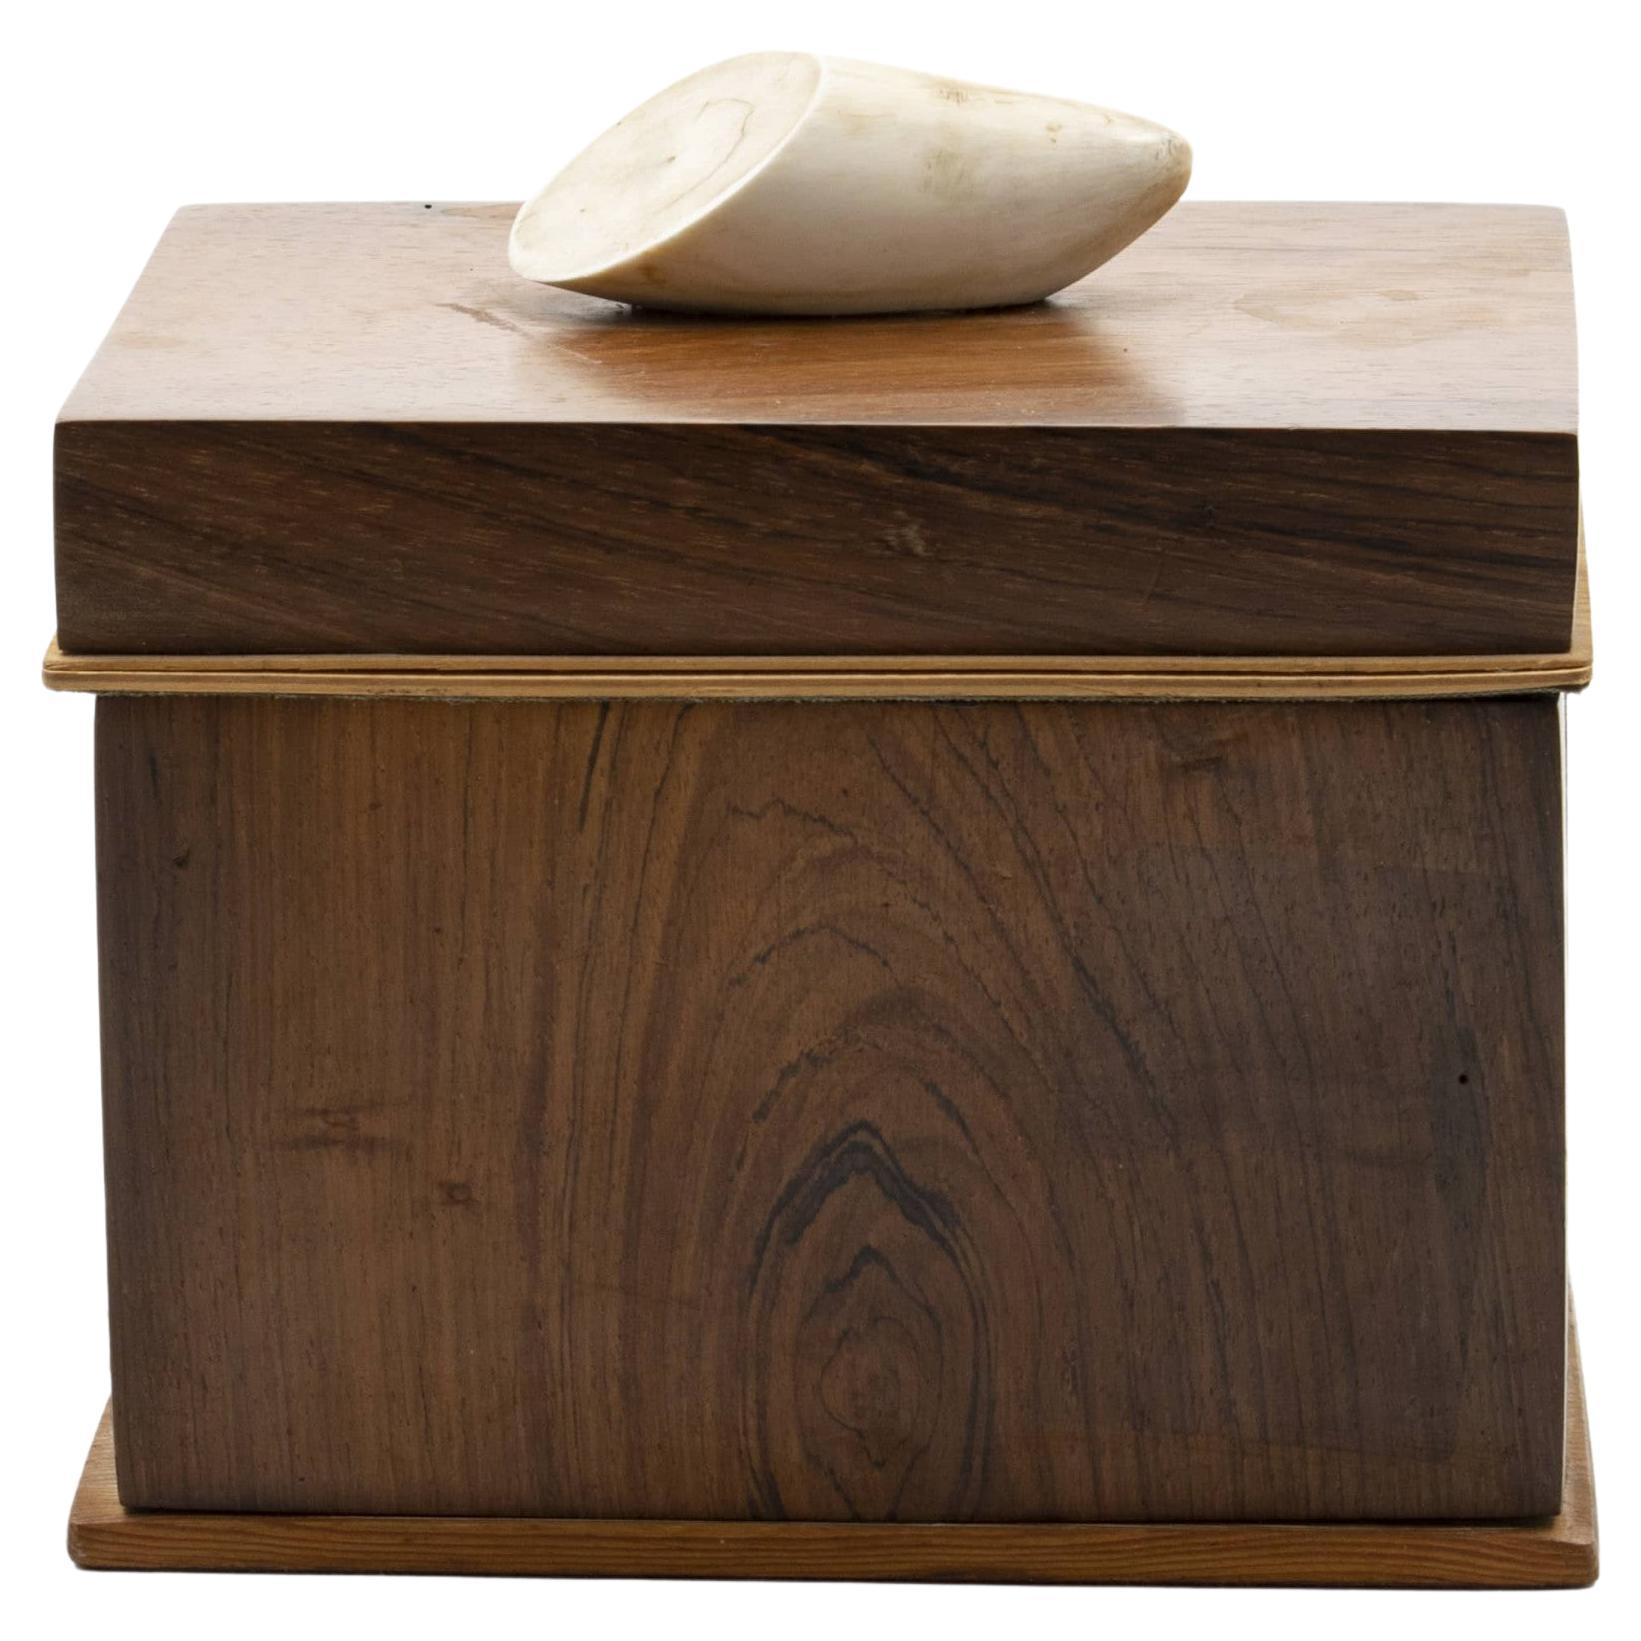 Danish Late Empire Tobacco Box in Nobel Wood, Lid with Walrus Tooth